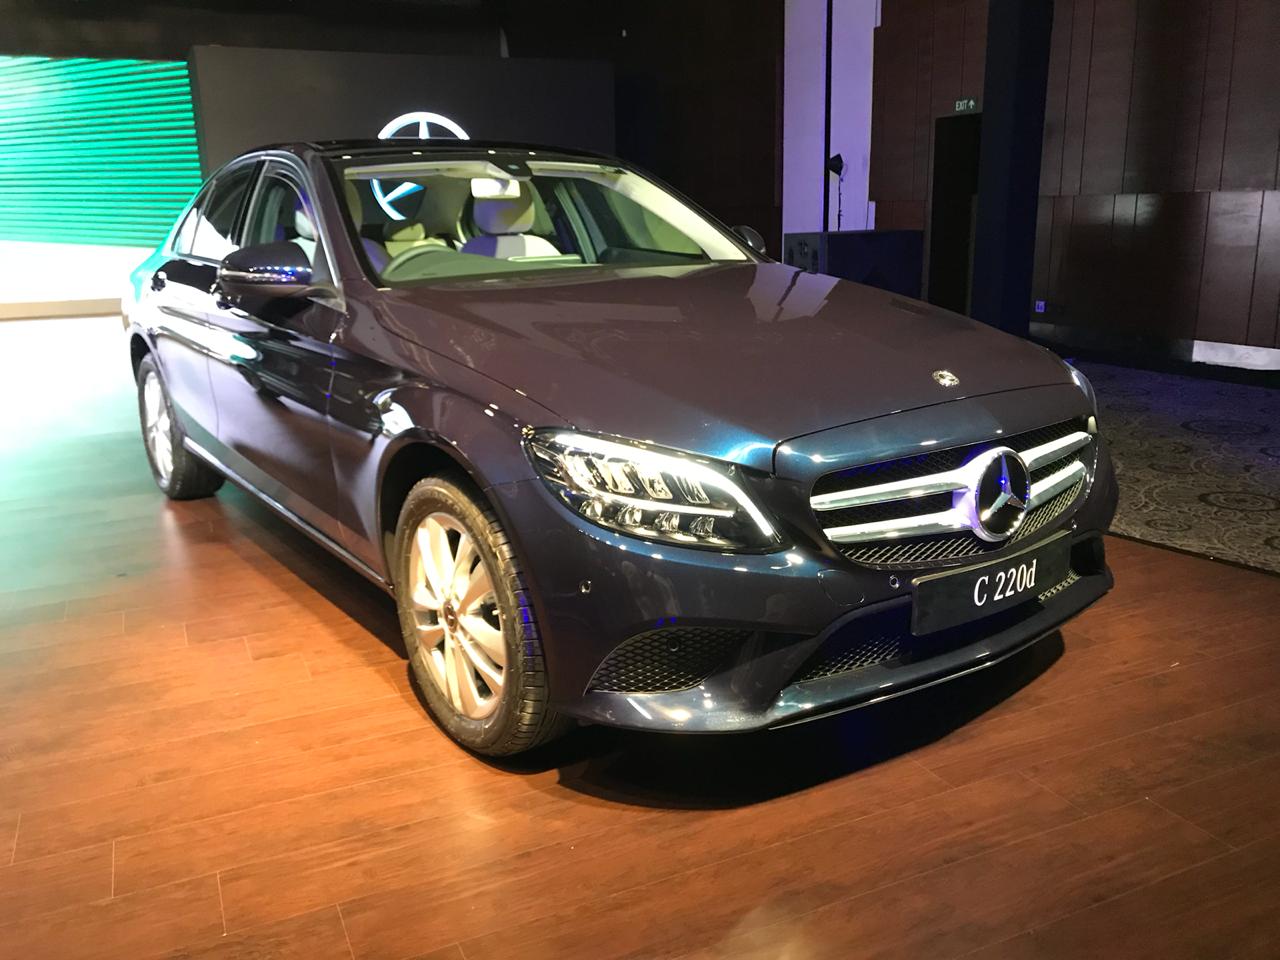 <p>The second model getting launched in the Mercedes-BenzInd C-Class family today is the C220d, powered by the same 2.0 litre diesel engine as the #C300d but with lower outputs of 194PS and 400Nm.</p>